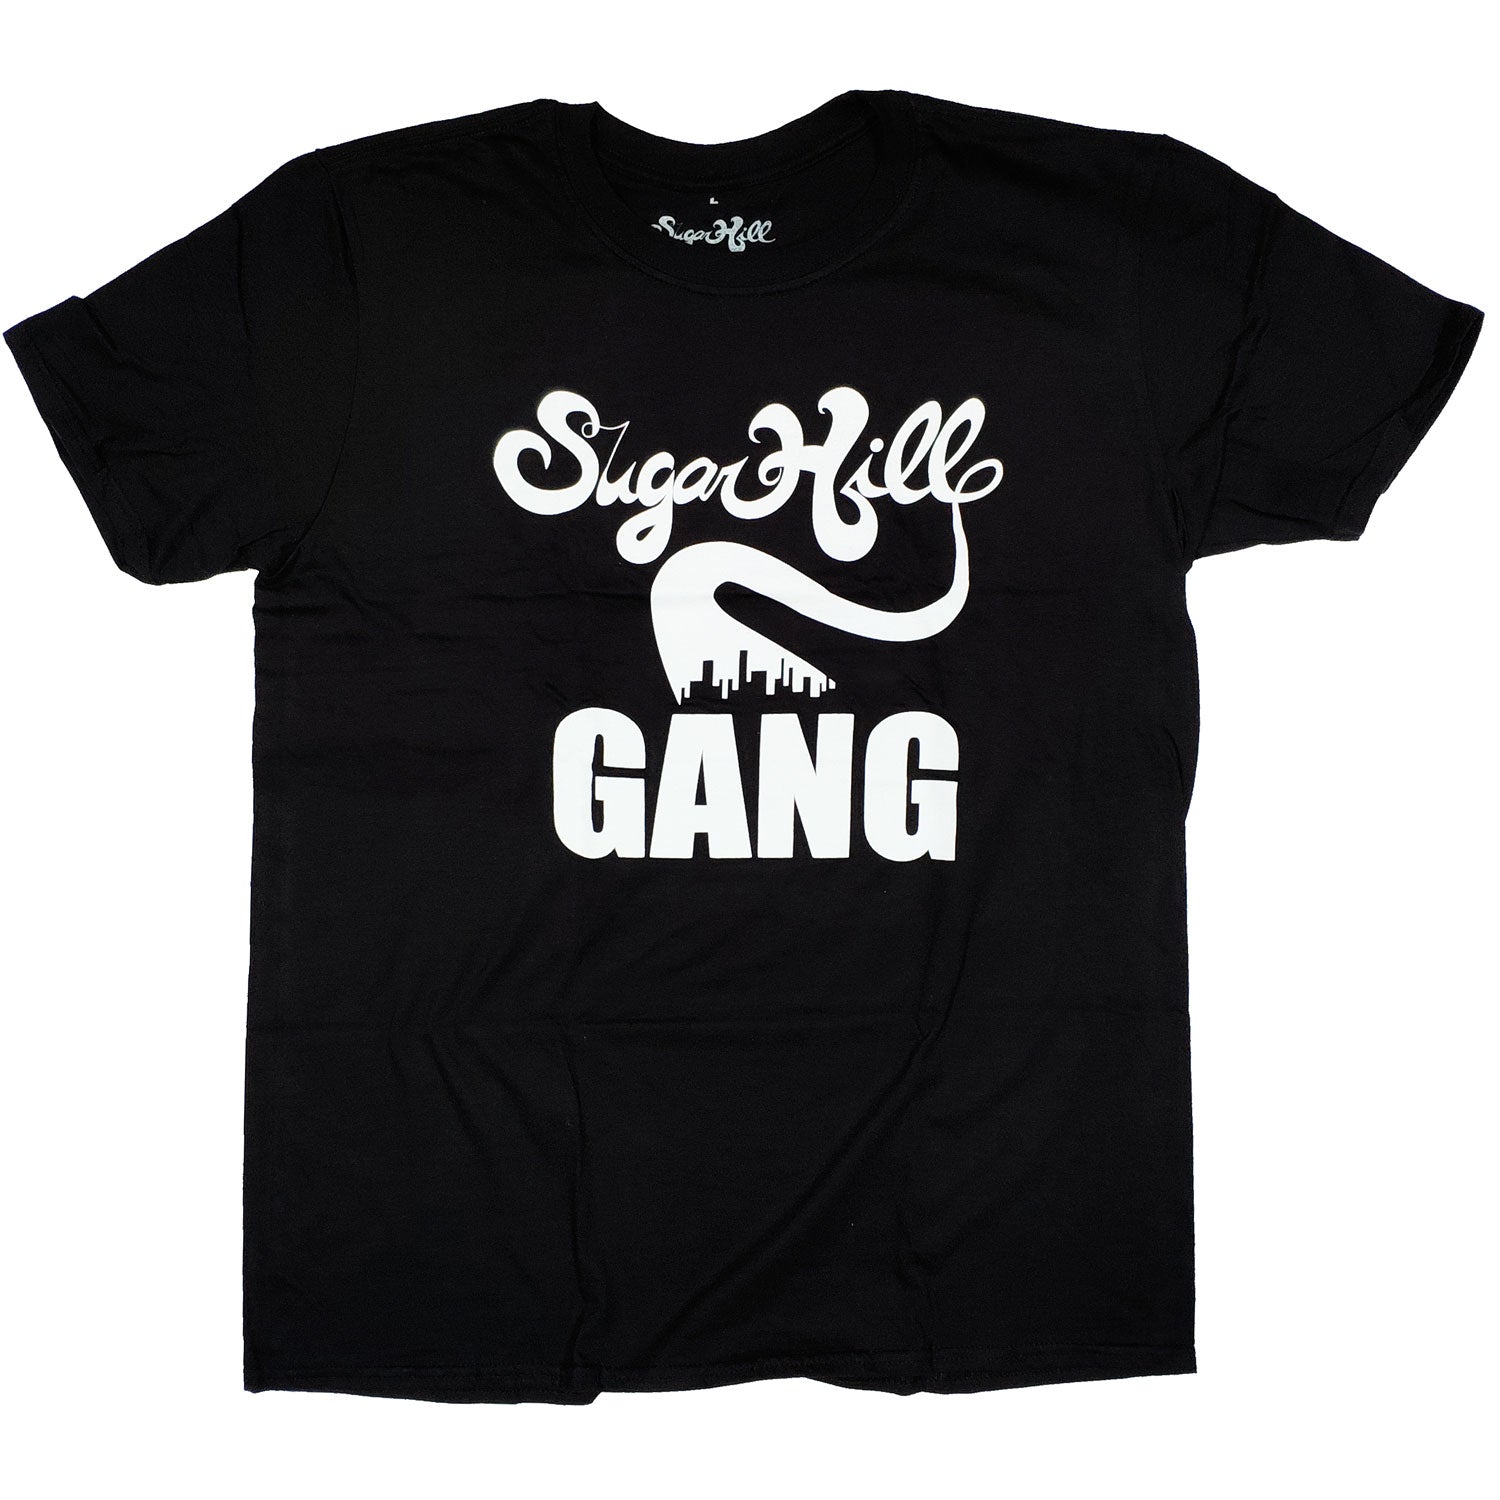 Sugarhill Gang T Shirt - Rappers Delight Tour 79 100% Official